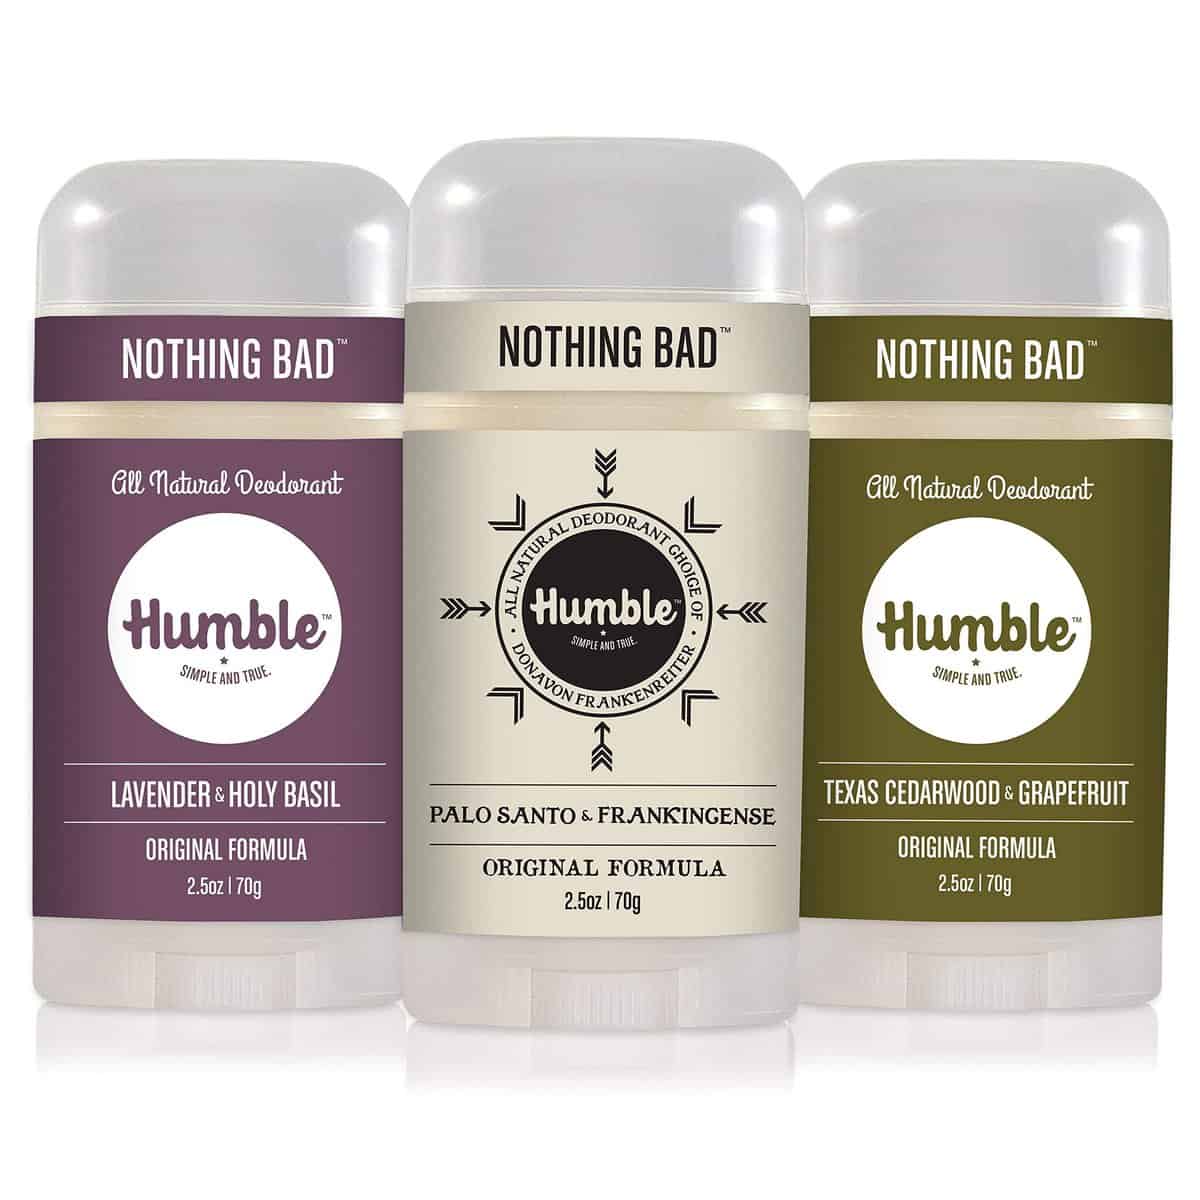 A group of three different Humble deodorant sticks. 